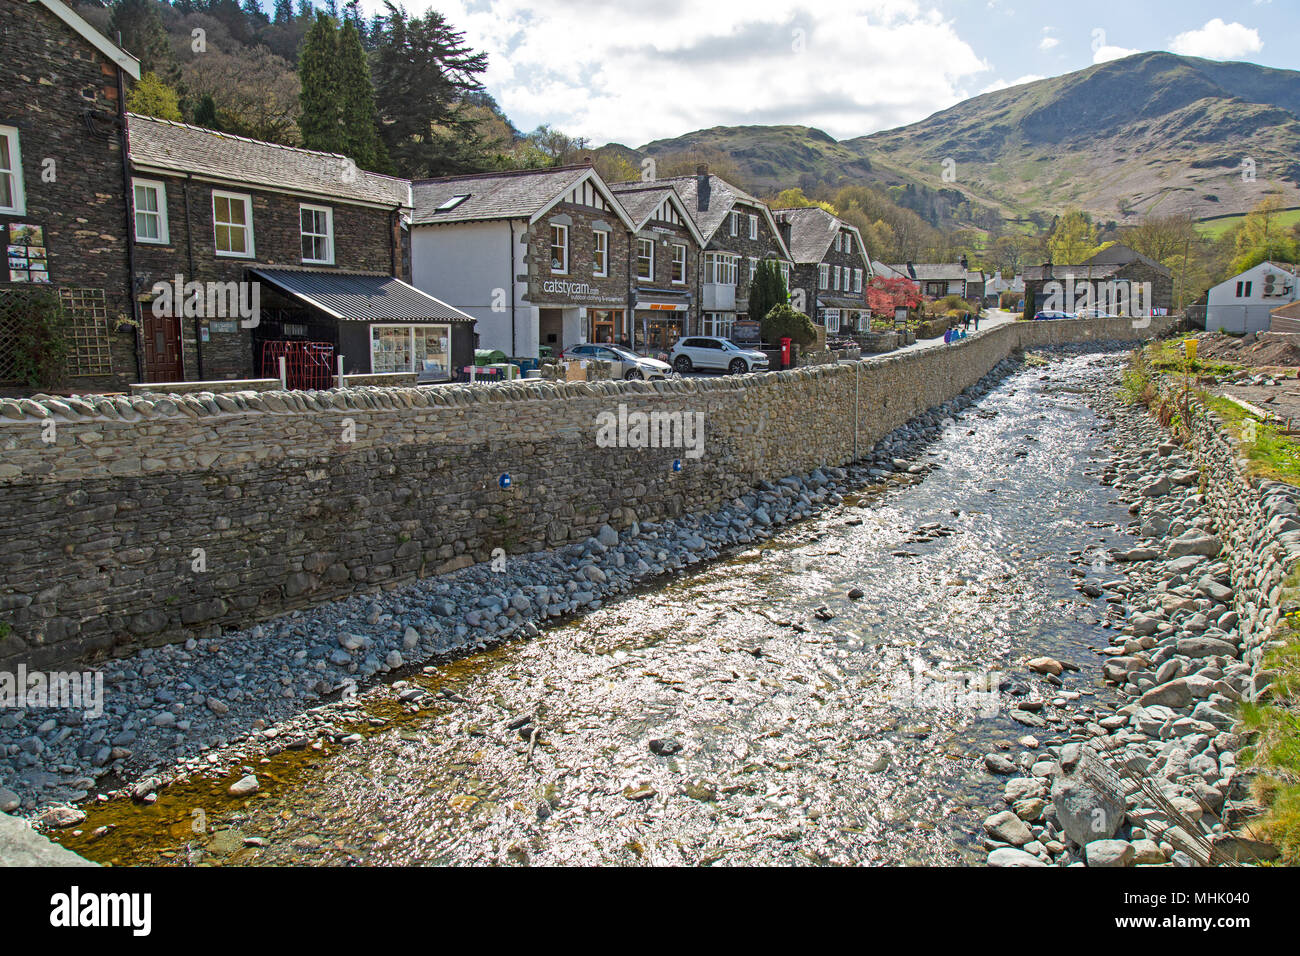 The village of Glenridding on the southern shores of Ullswater in the Lake District National Park in England, with the river, Glenridding Beck Stock Photo